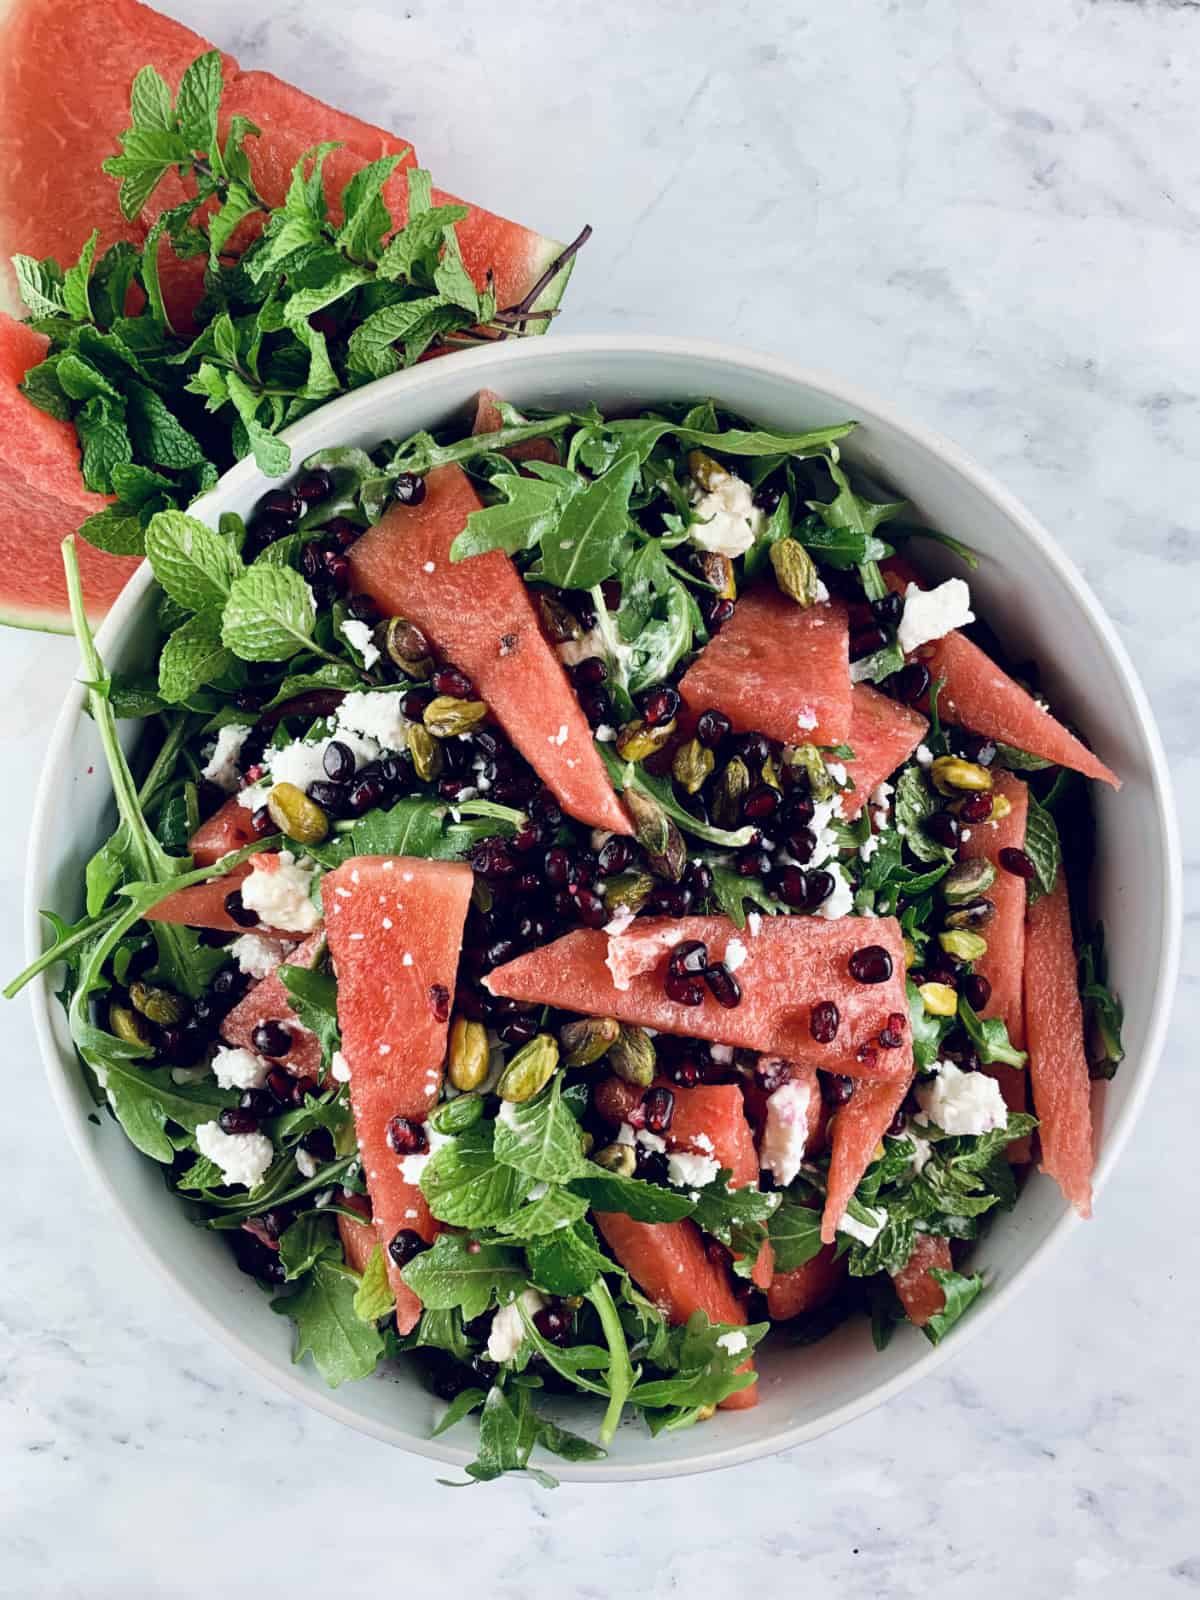 CLOSE UP OF PERSIAN WATERMELON & FETA SALAD IN A WHITE BOWL WITH WATERMELON SLICES & MINT ON THE SIDE